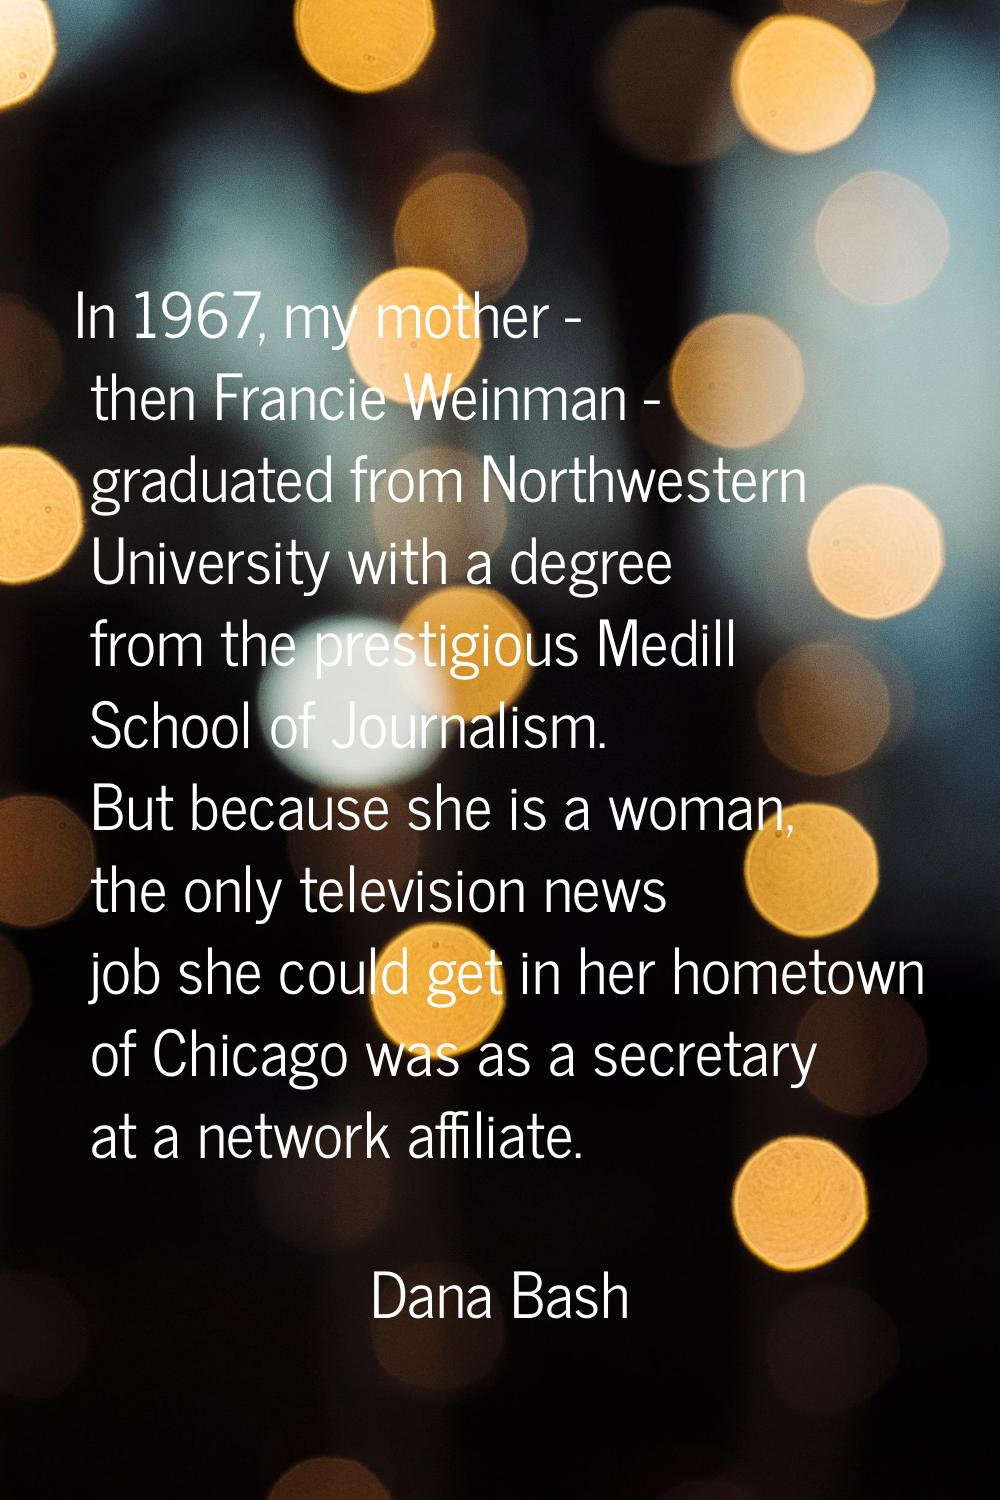 In 1967, my mother - then Francie Weinman - graduated from Northwestern University with a degree fr